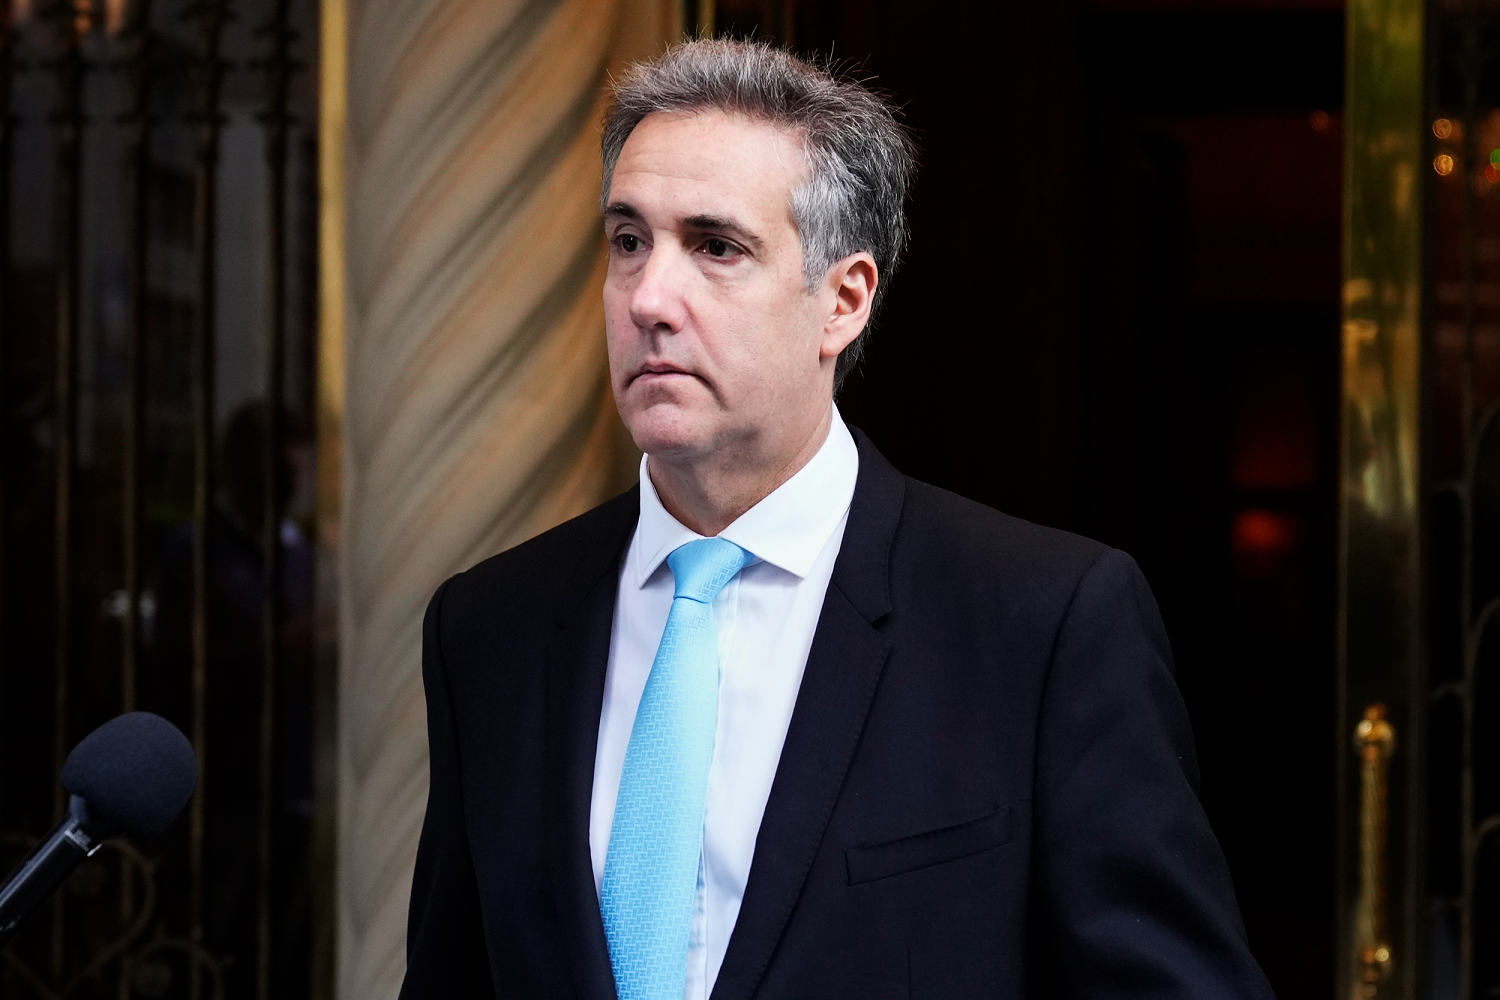 'Was it a lie?': Michael Cohen faces grilling from defense. What you missed on Day 17 of Trump's hush money trial.